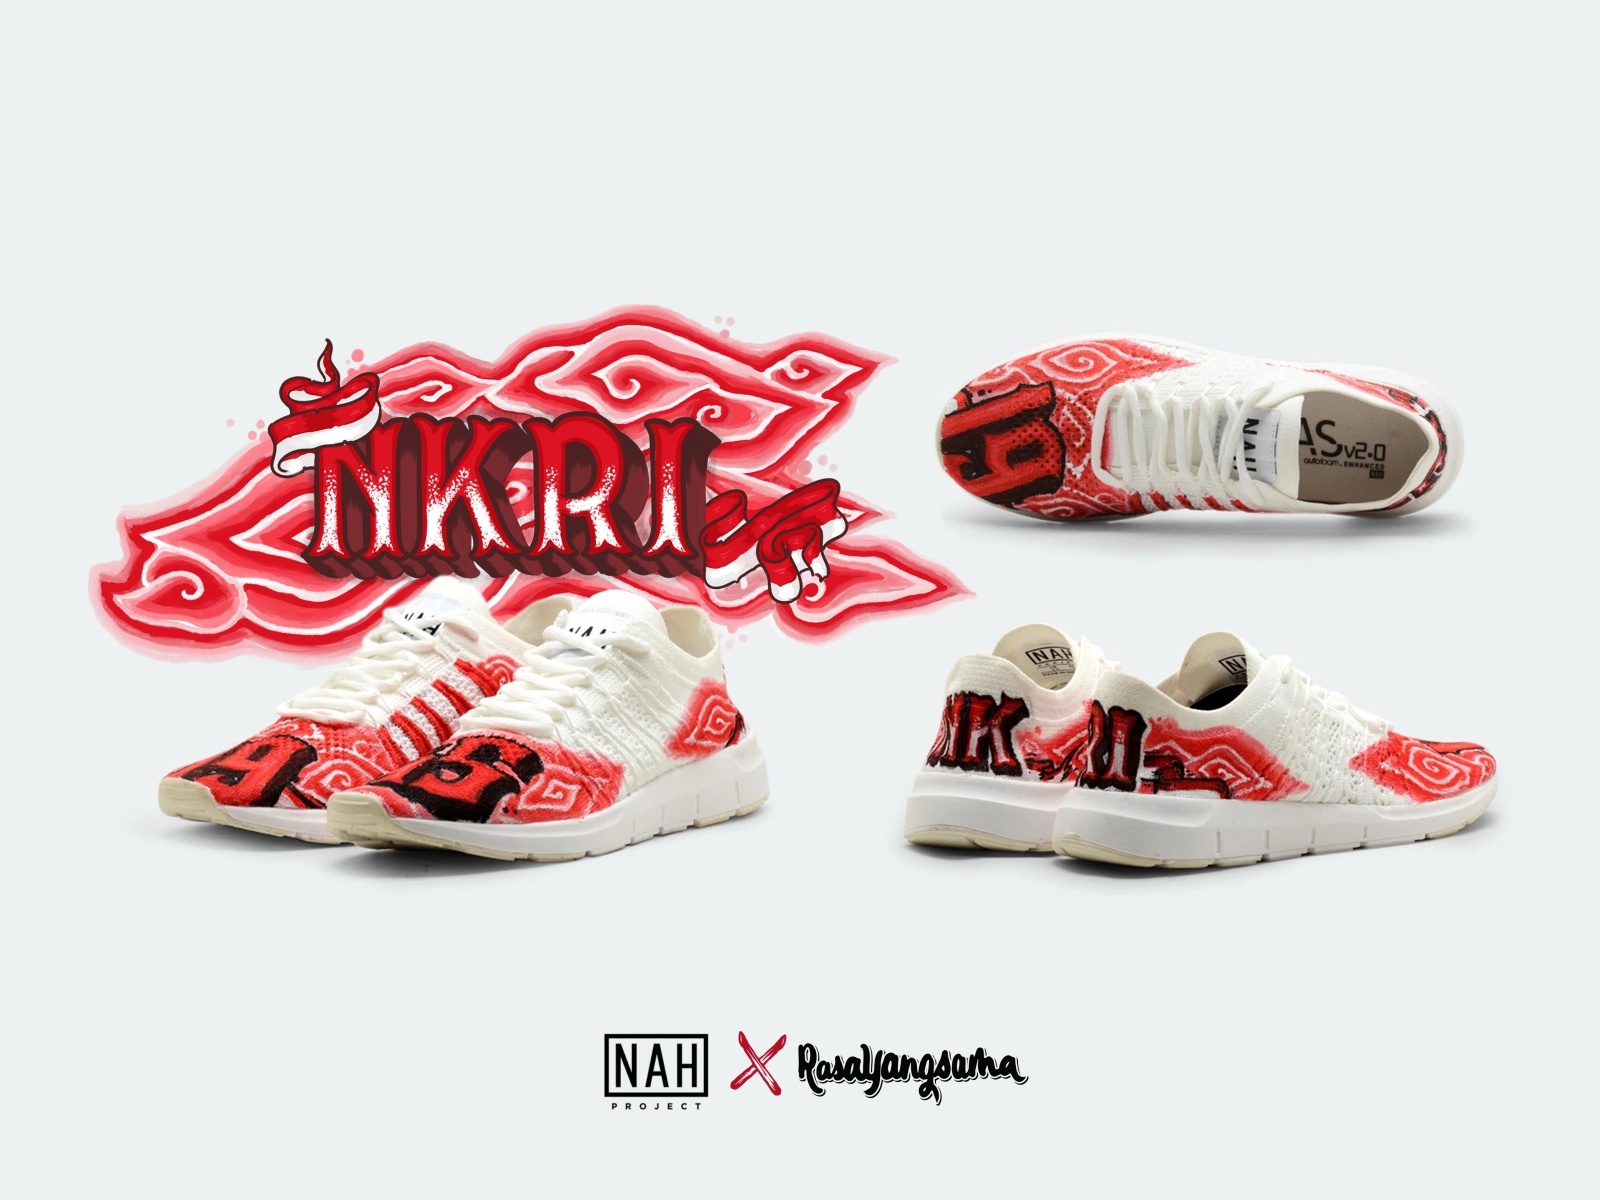 Nkri collaboration with nah project by rasayangsama on